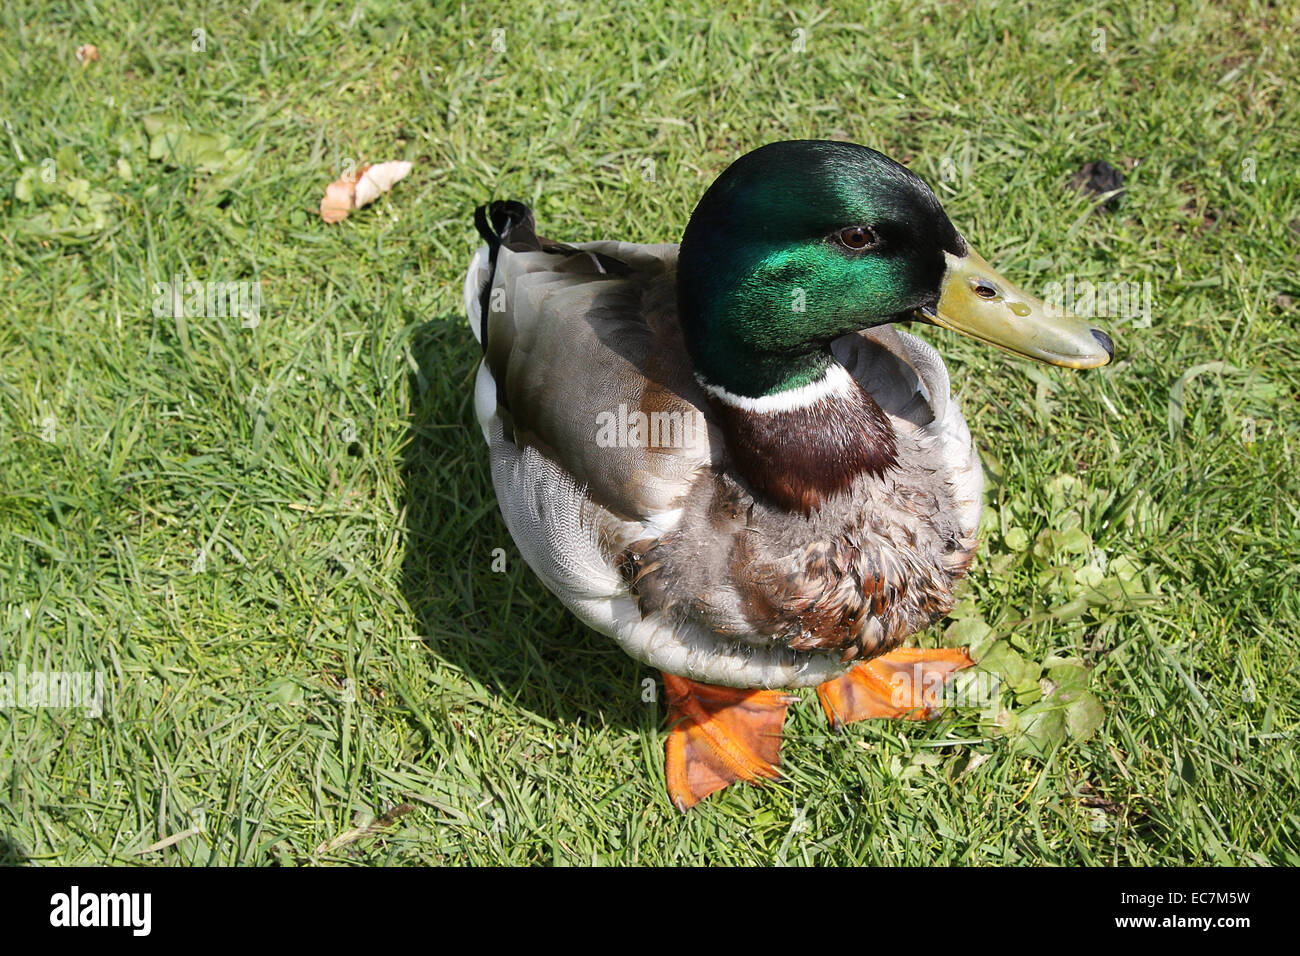 Male Mallard (Anas platyrhynchos) in their breeding plumage. The mallard is the most famous duck and the root form of the domestic duck. Photo: Klaus Nowottnick Date: April 23, 2010 Stock Photo